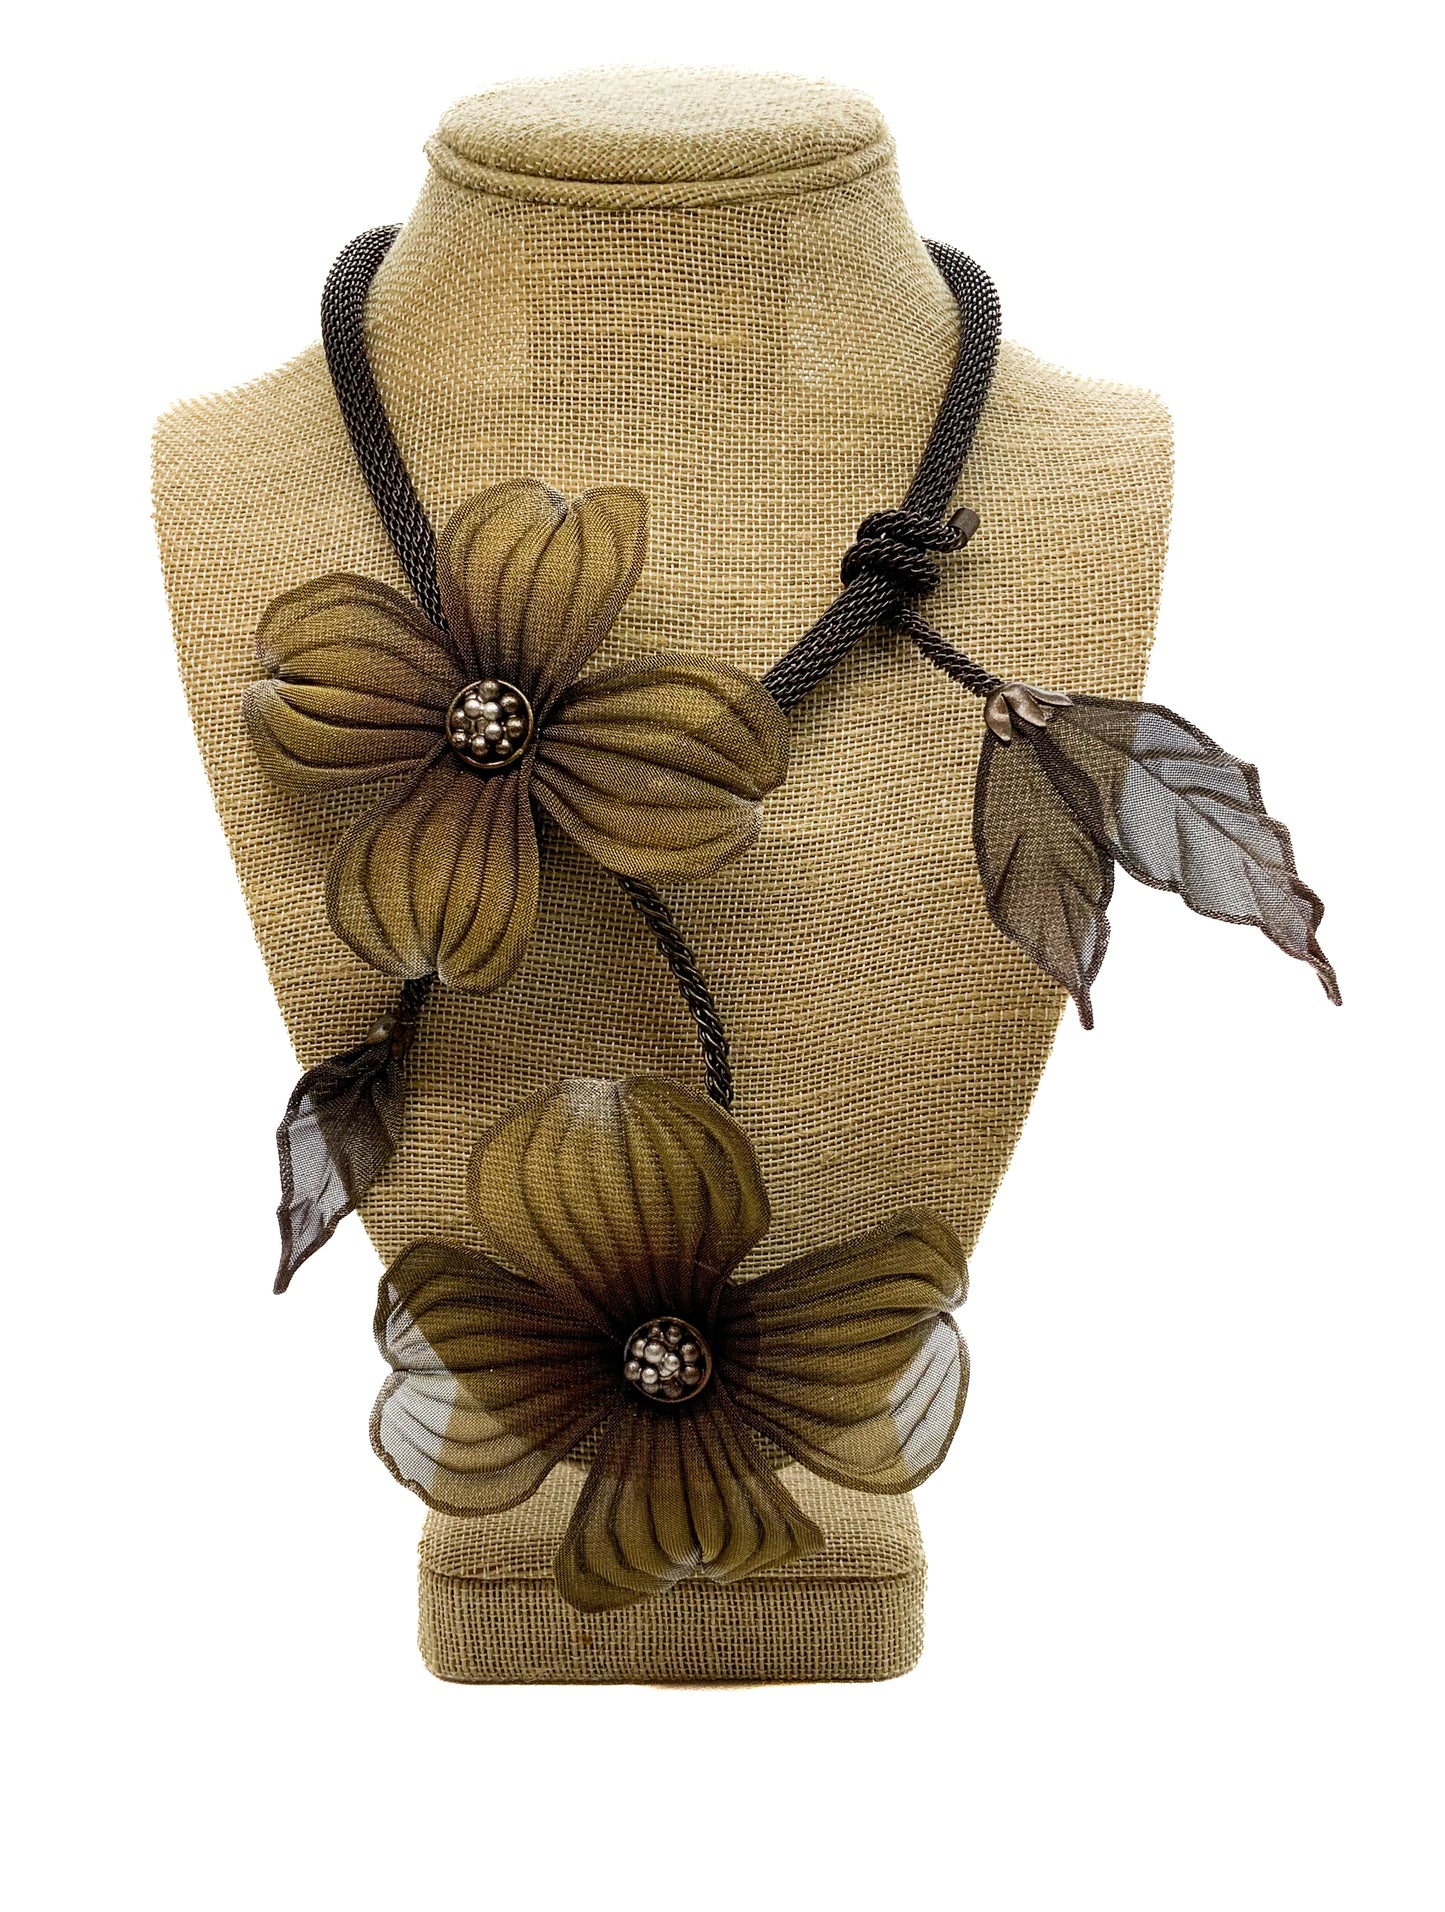 Dogwood Bloom Necklace-24 inch